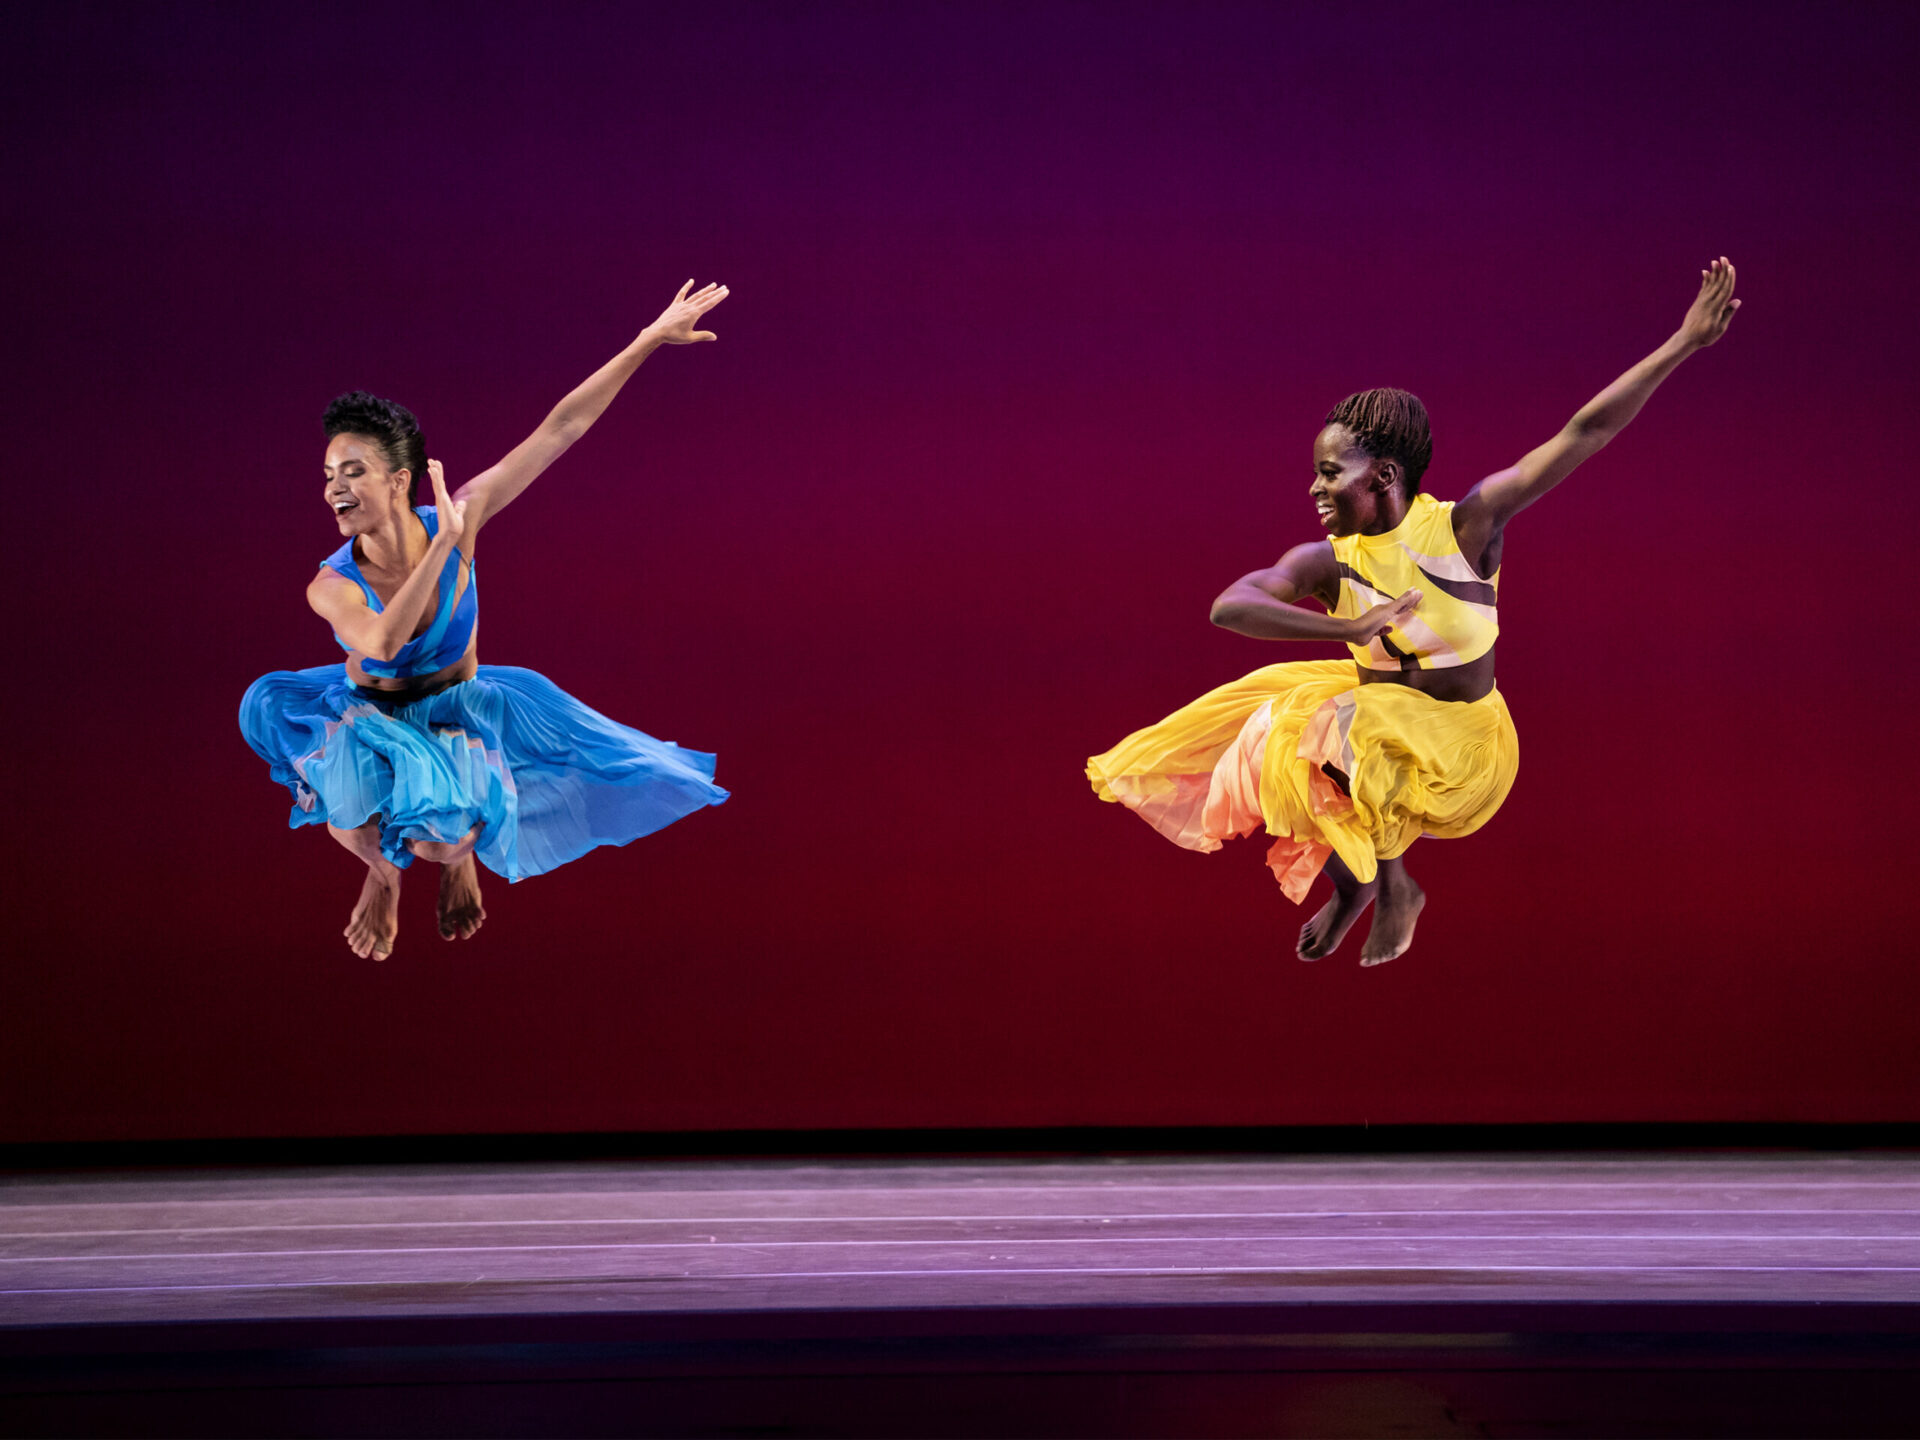 Alvin Ailey American Dance Theater Explores Social and Cultural Issues Through Dance